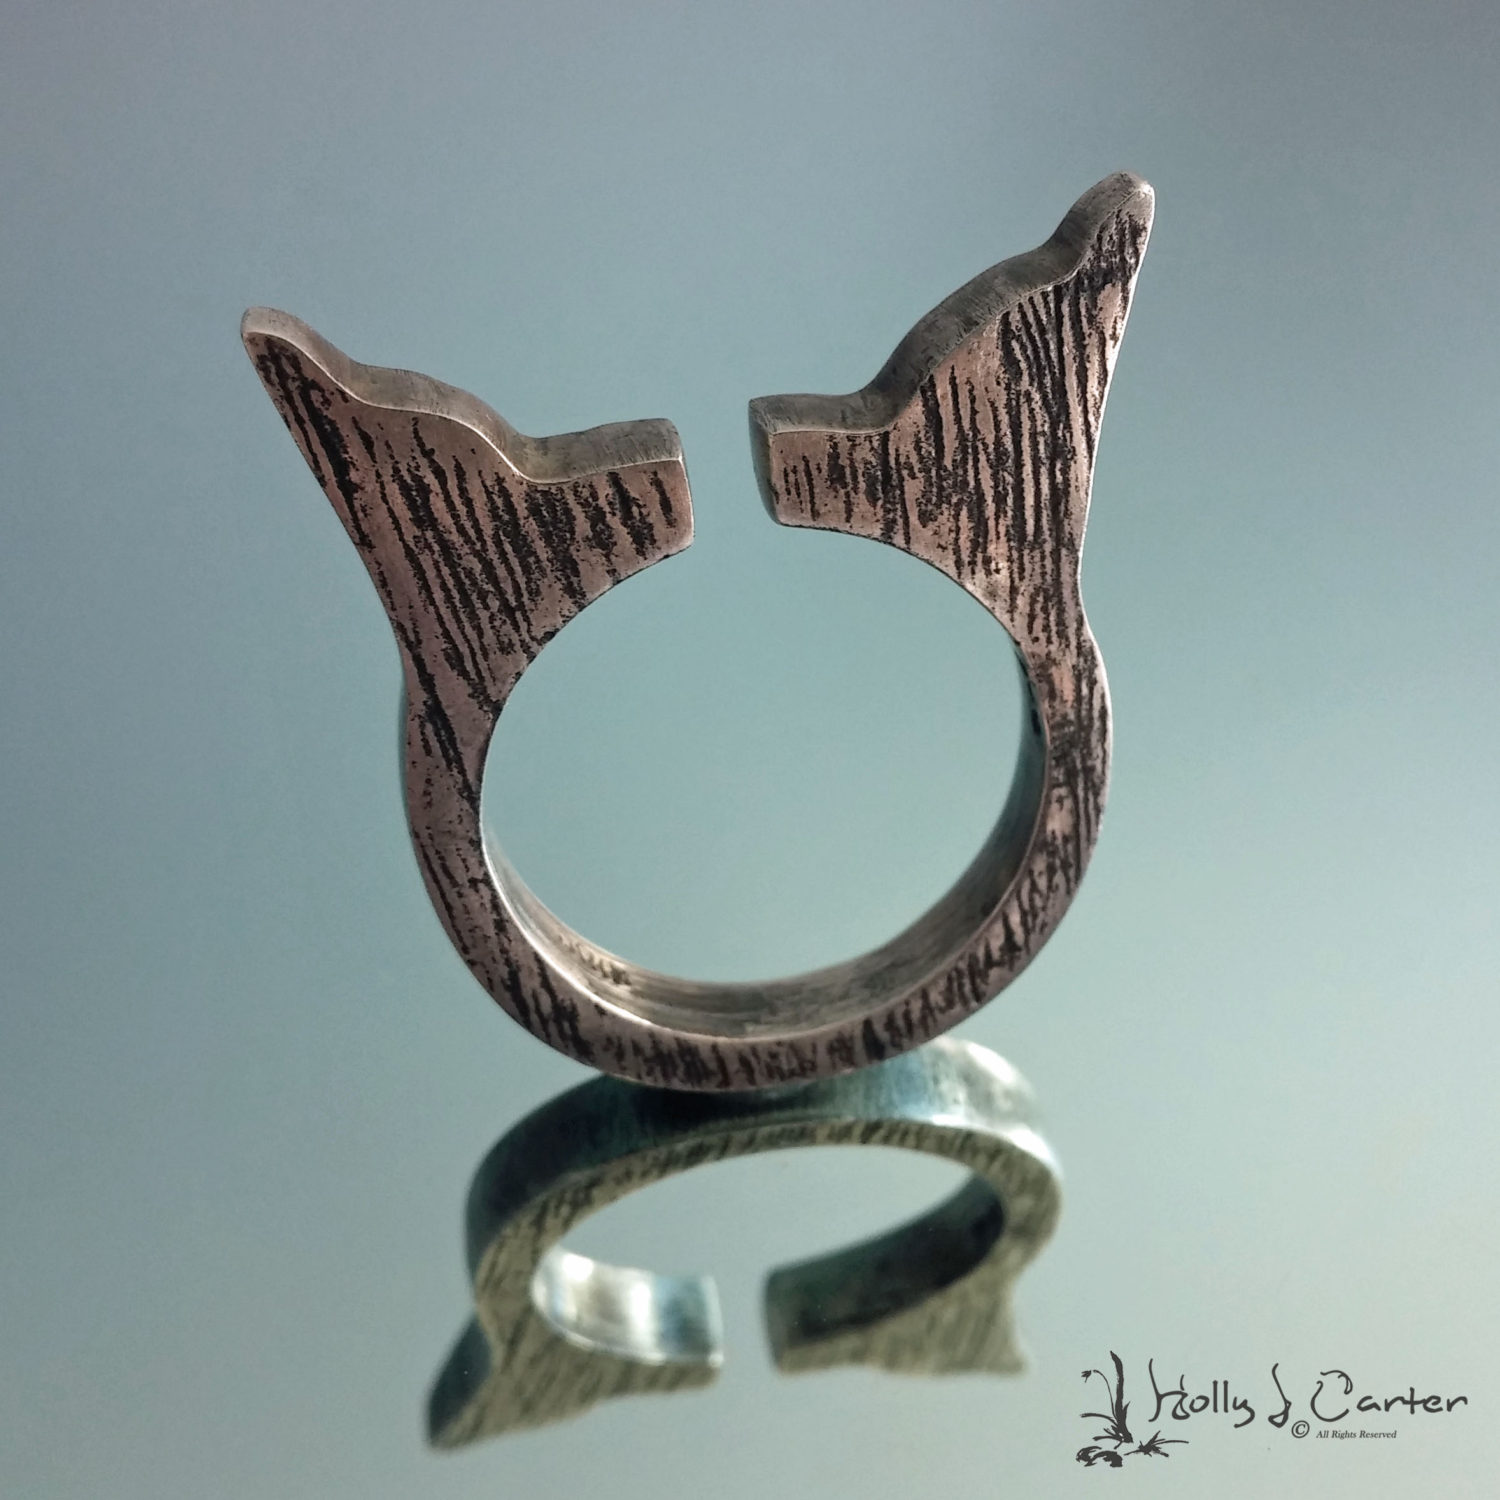 Wood Grain Sterling Silver Ring by Holly J Carter